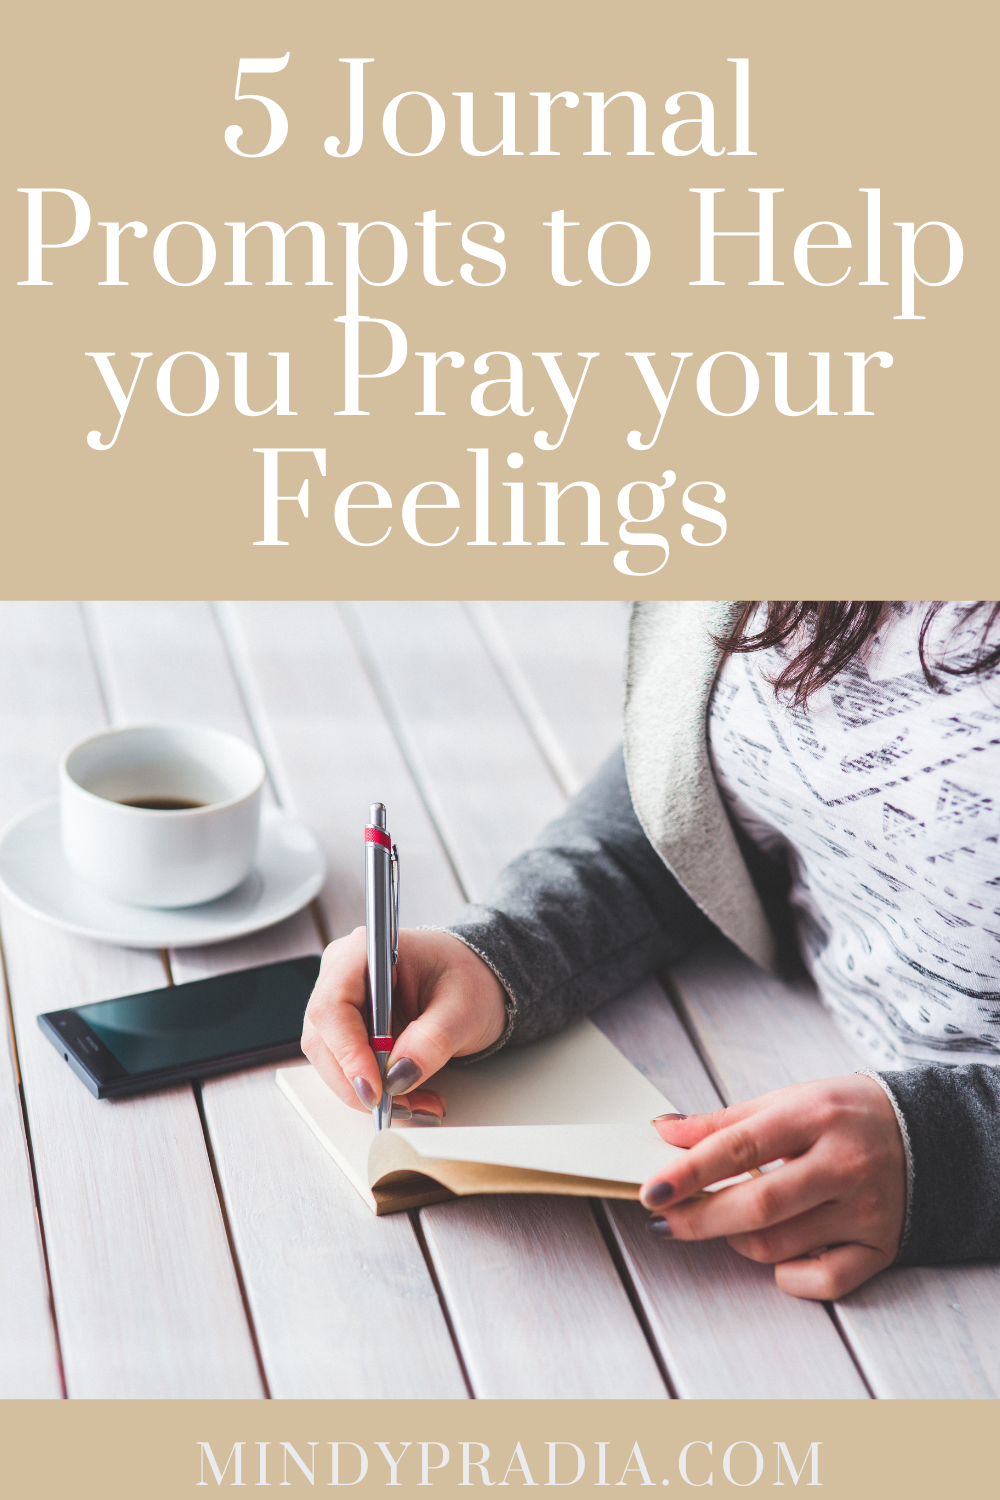 5 Journal Prompts to Help you Pray your Feelings — Mindy Pradia